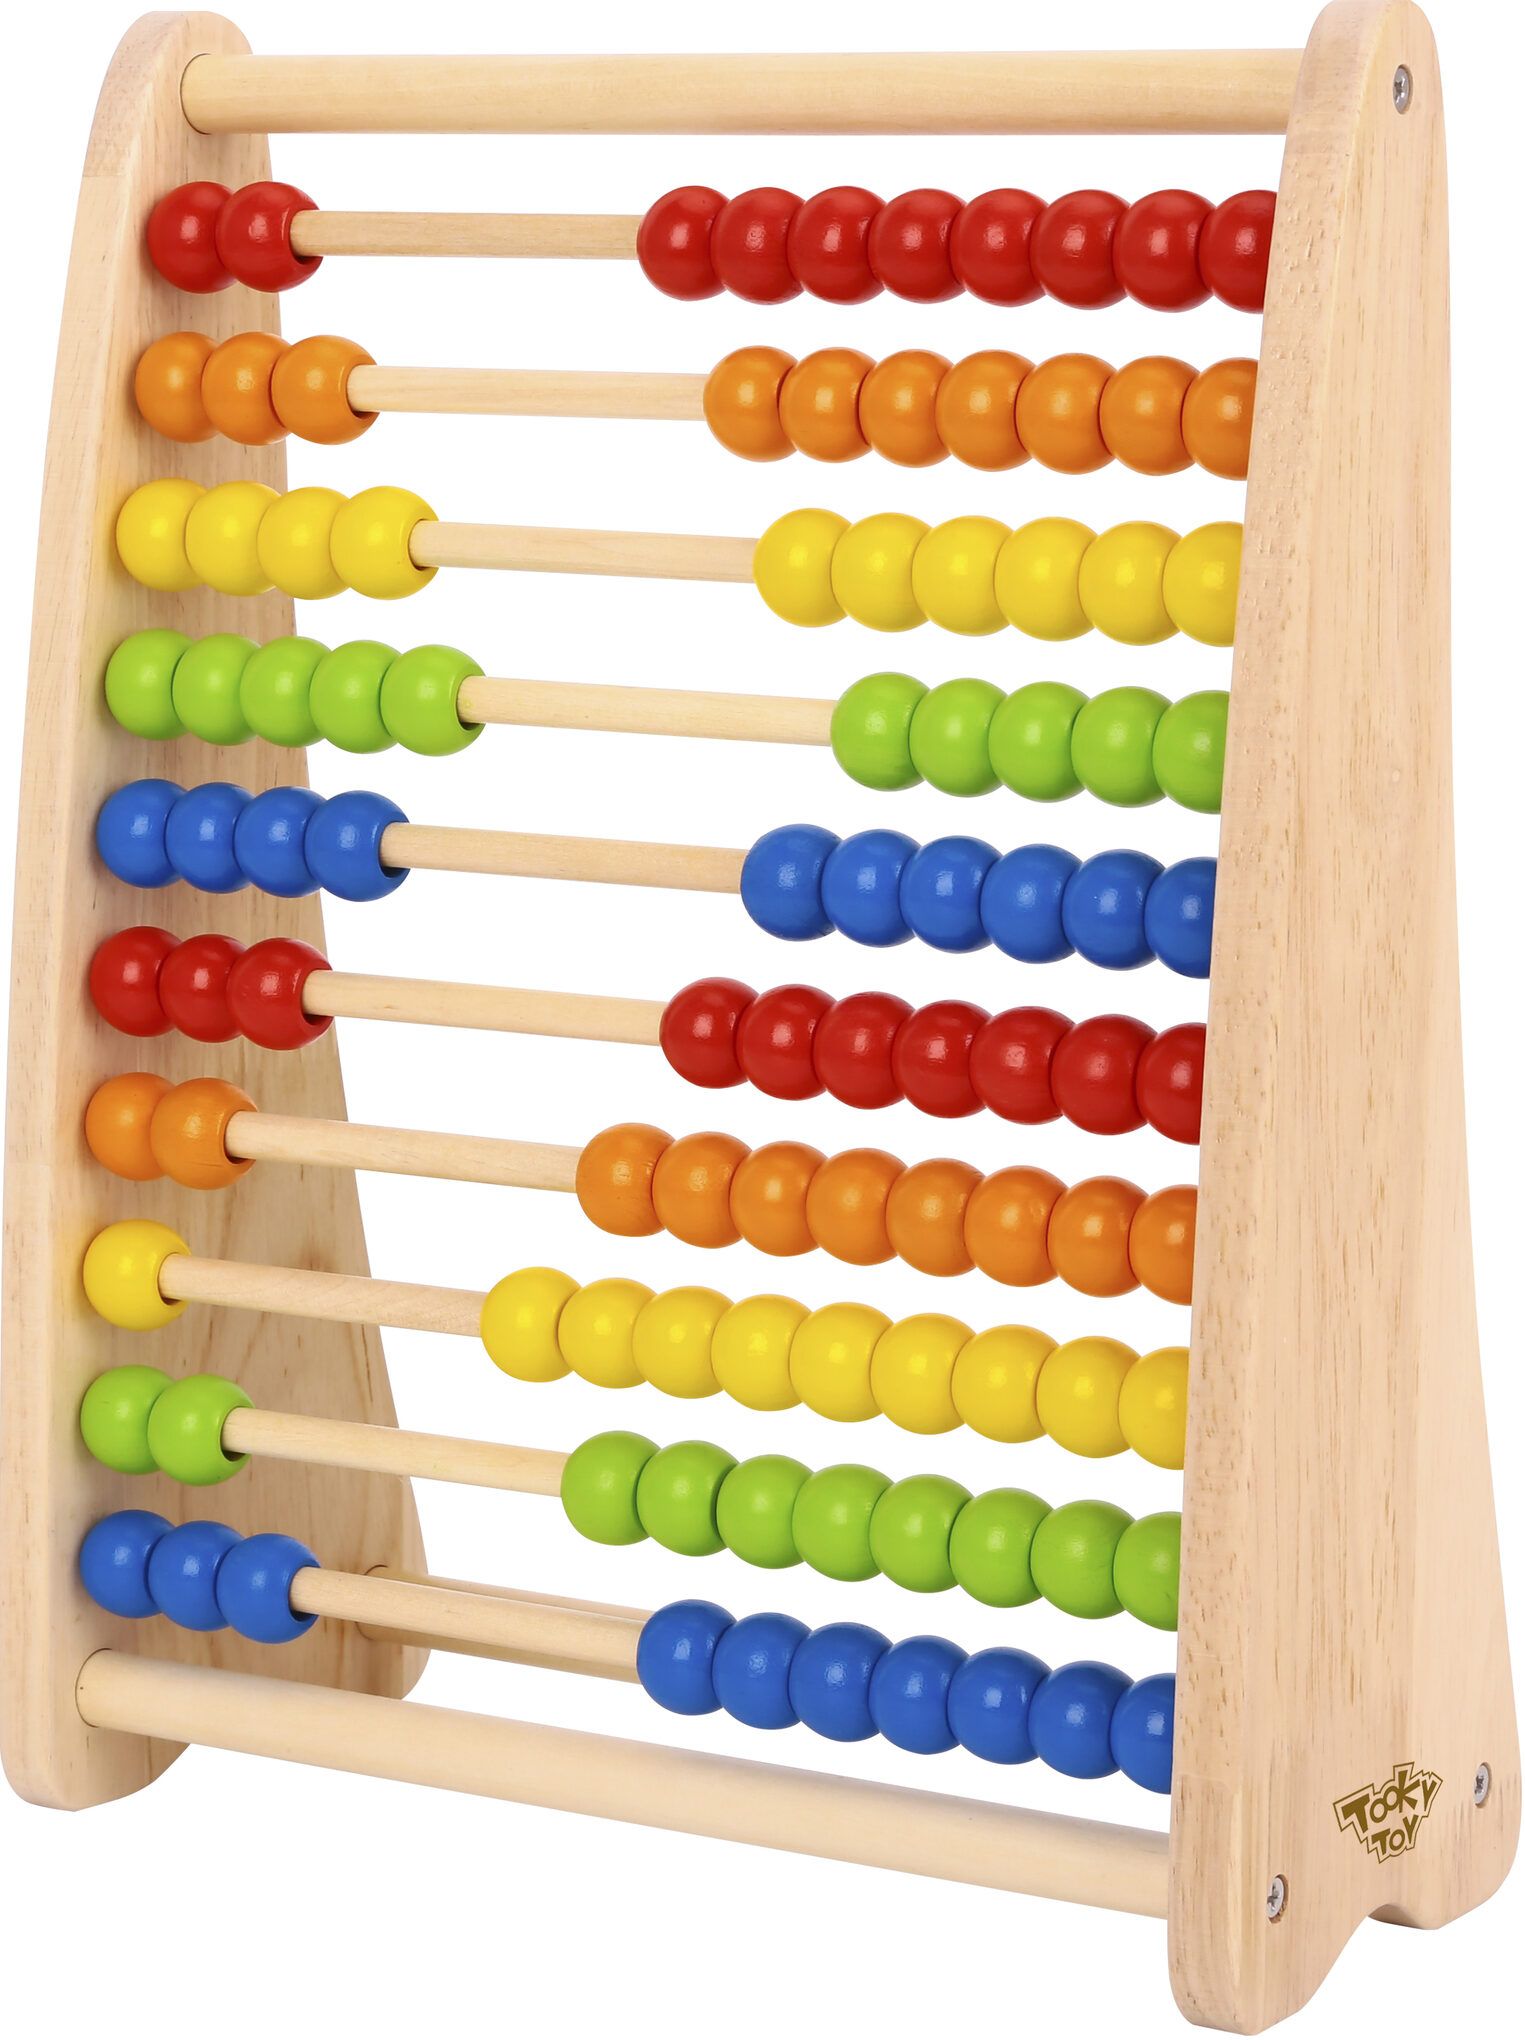 Wooden Beads abacus for children - wooden abacus for numeracy skills - shop wooden playsets from tooky toys